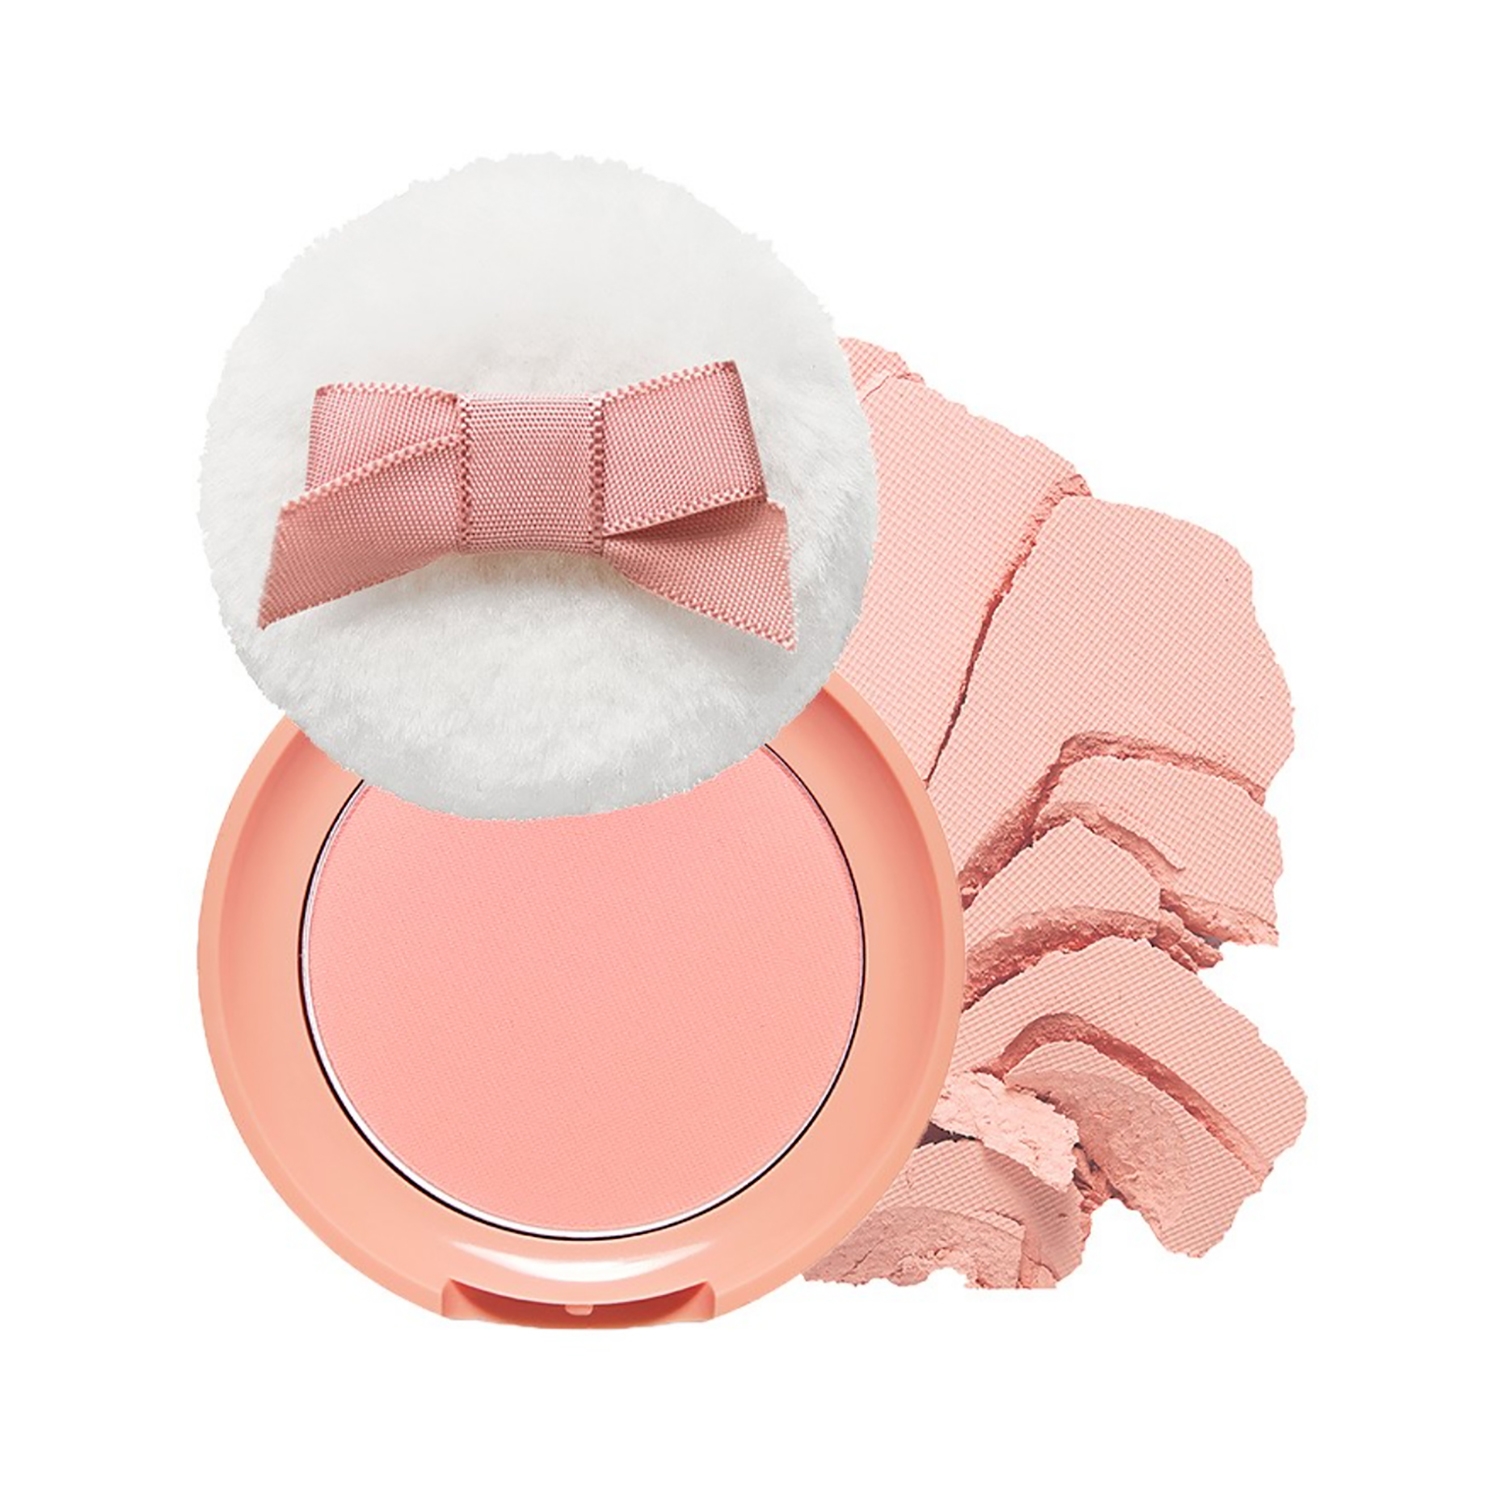 ETUDE HOUSE | ETUDE HOUSE Lovely Cookie Blusher - OR201 Apricot Peach Mousse (4g)